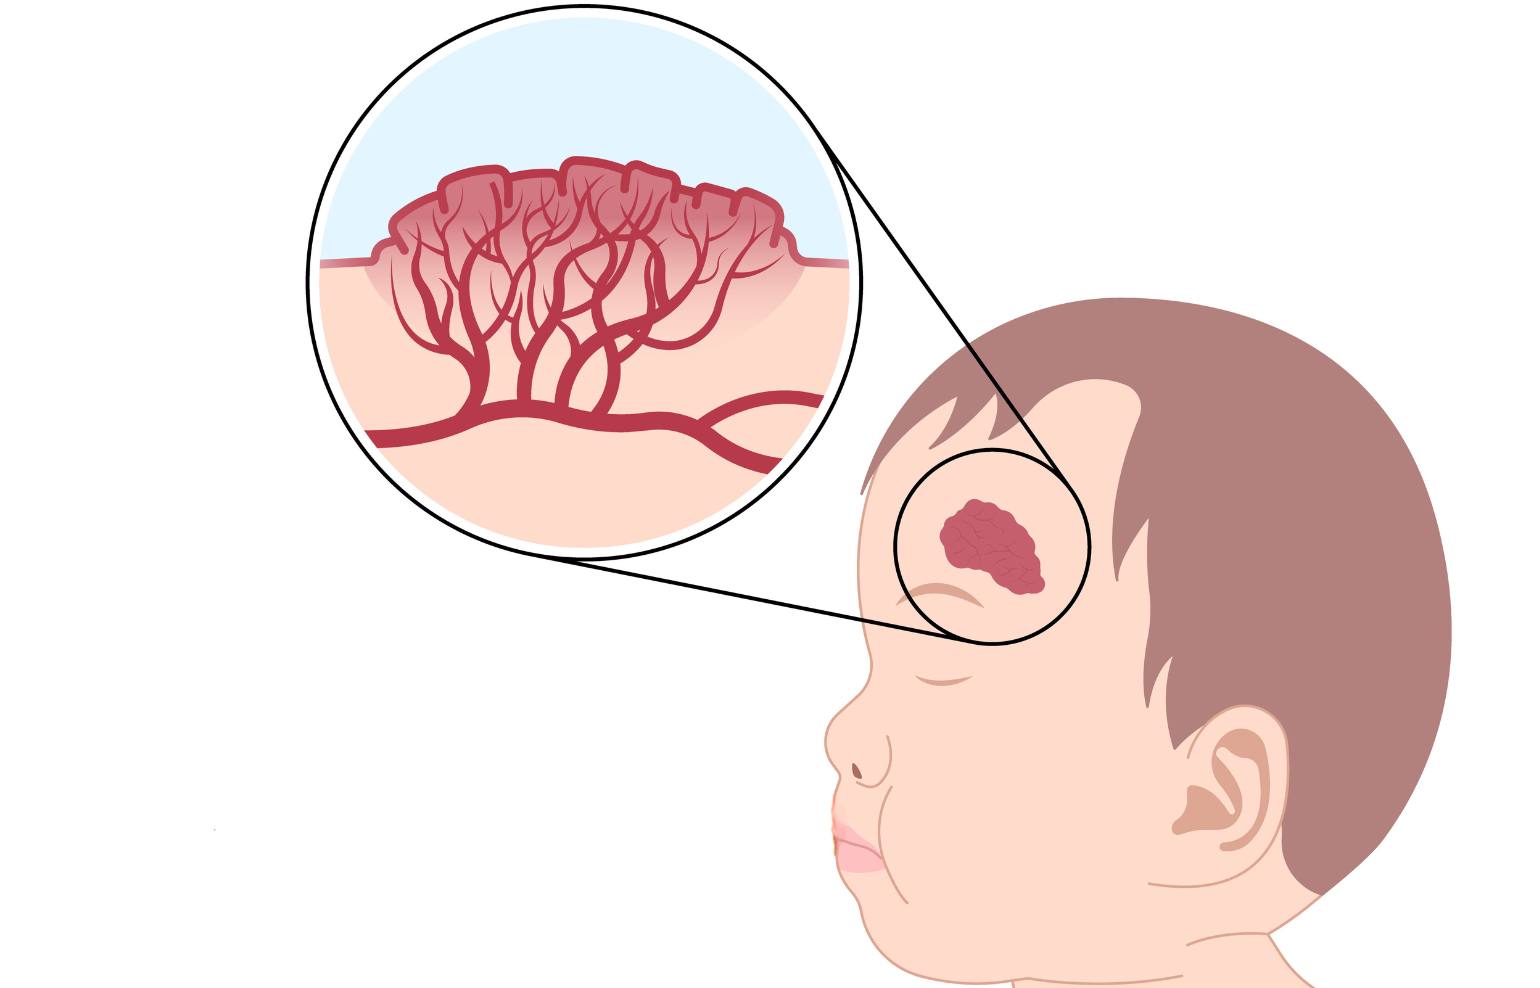 An illustration showing the left side of an infant's face with a hemangioma above the left eyebrow, with a detail of what a hemangioma looks like under the surface of the skin.